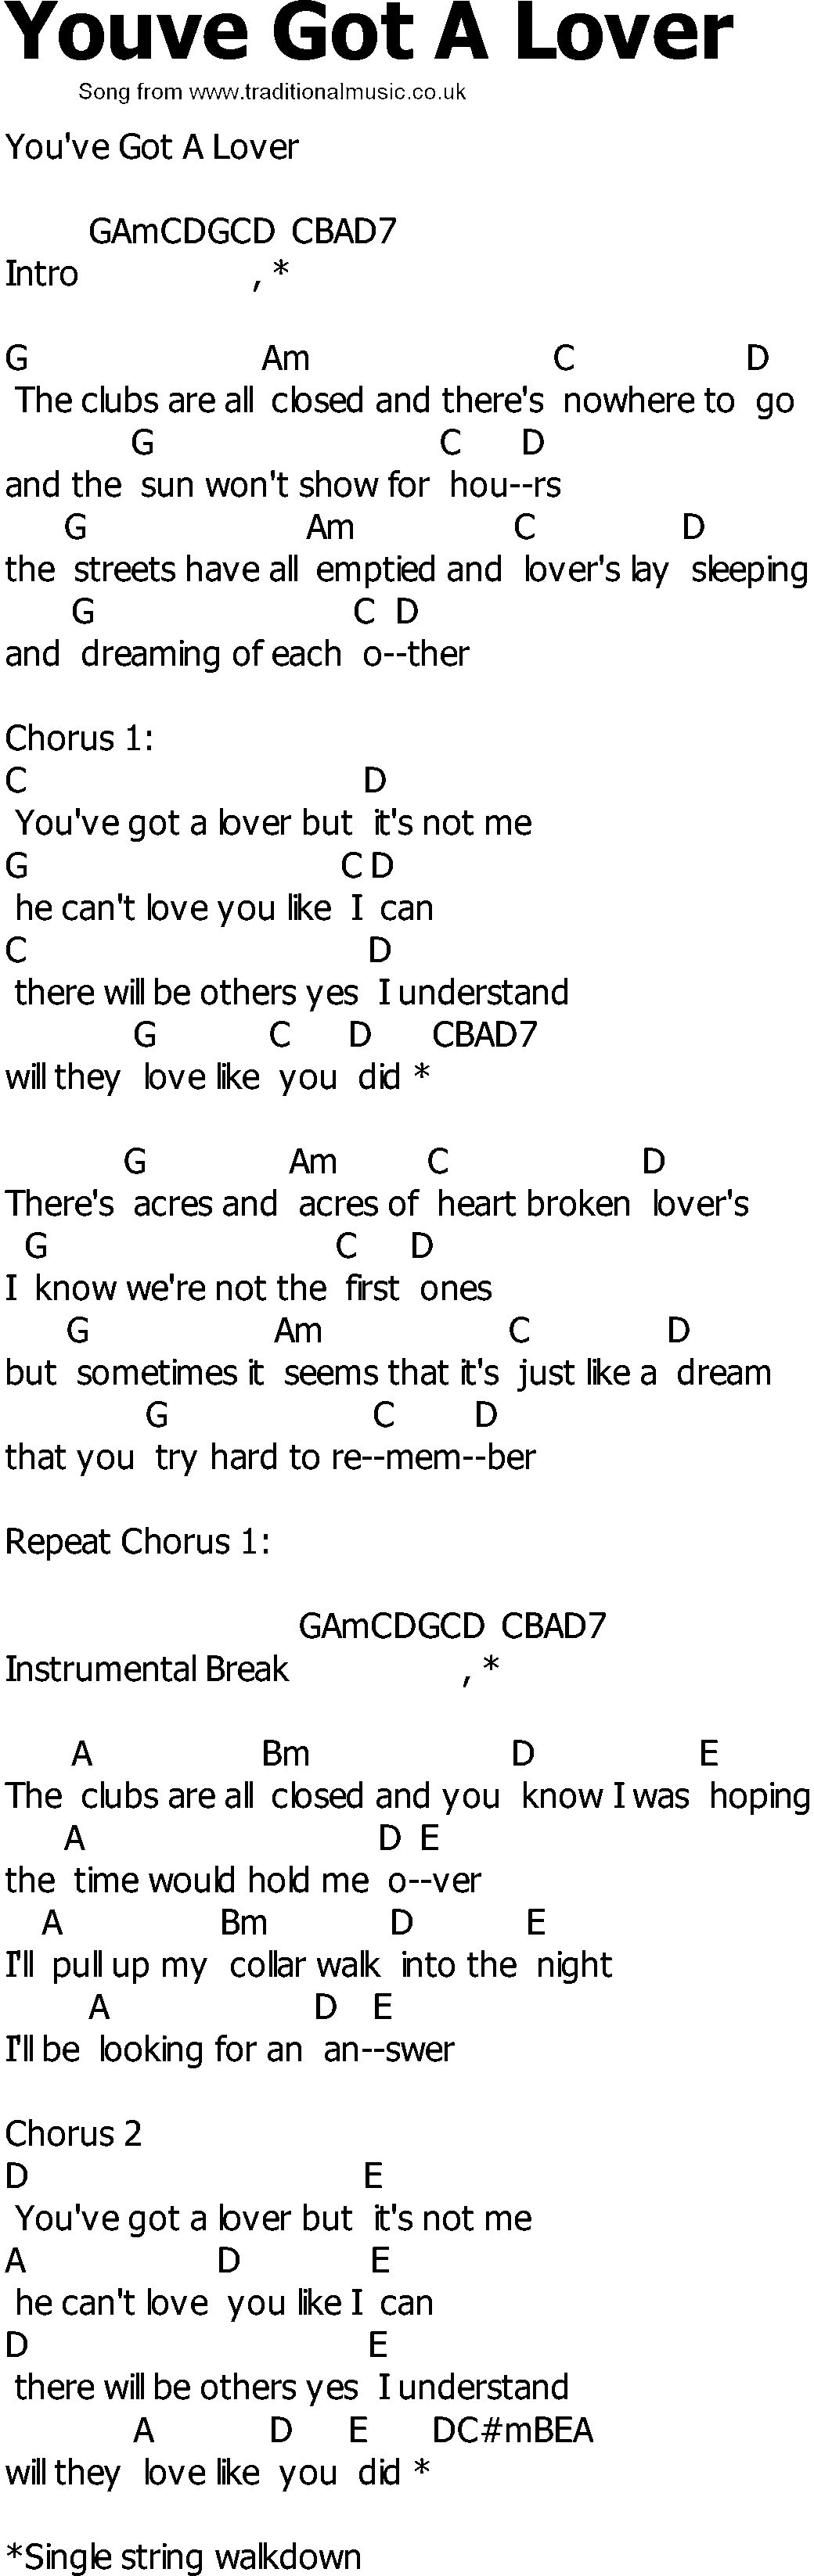 Old Country song lyrics with chords - Youve Got A Lover